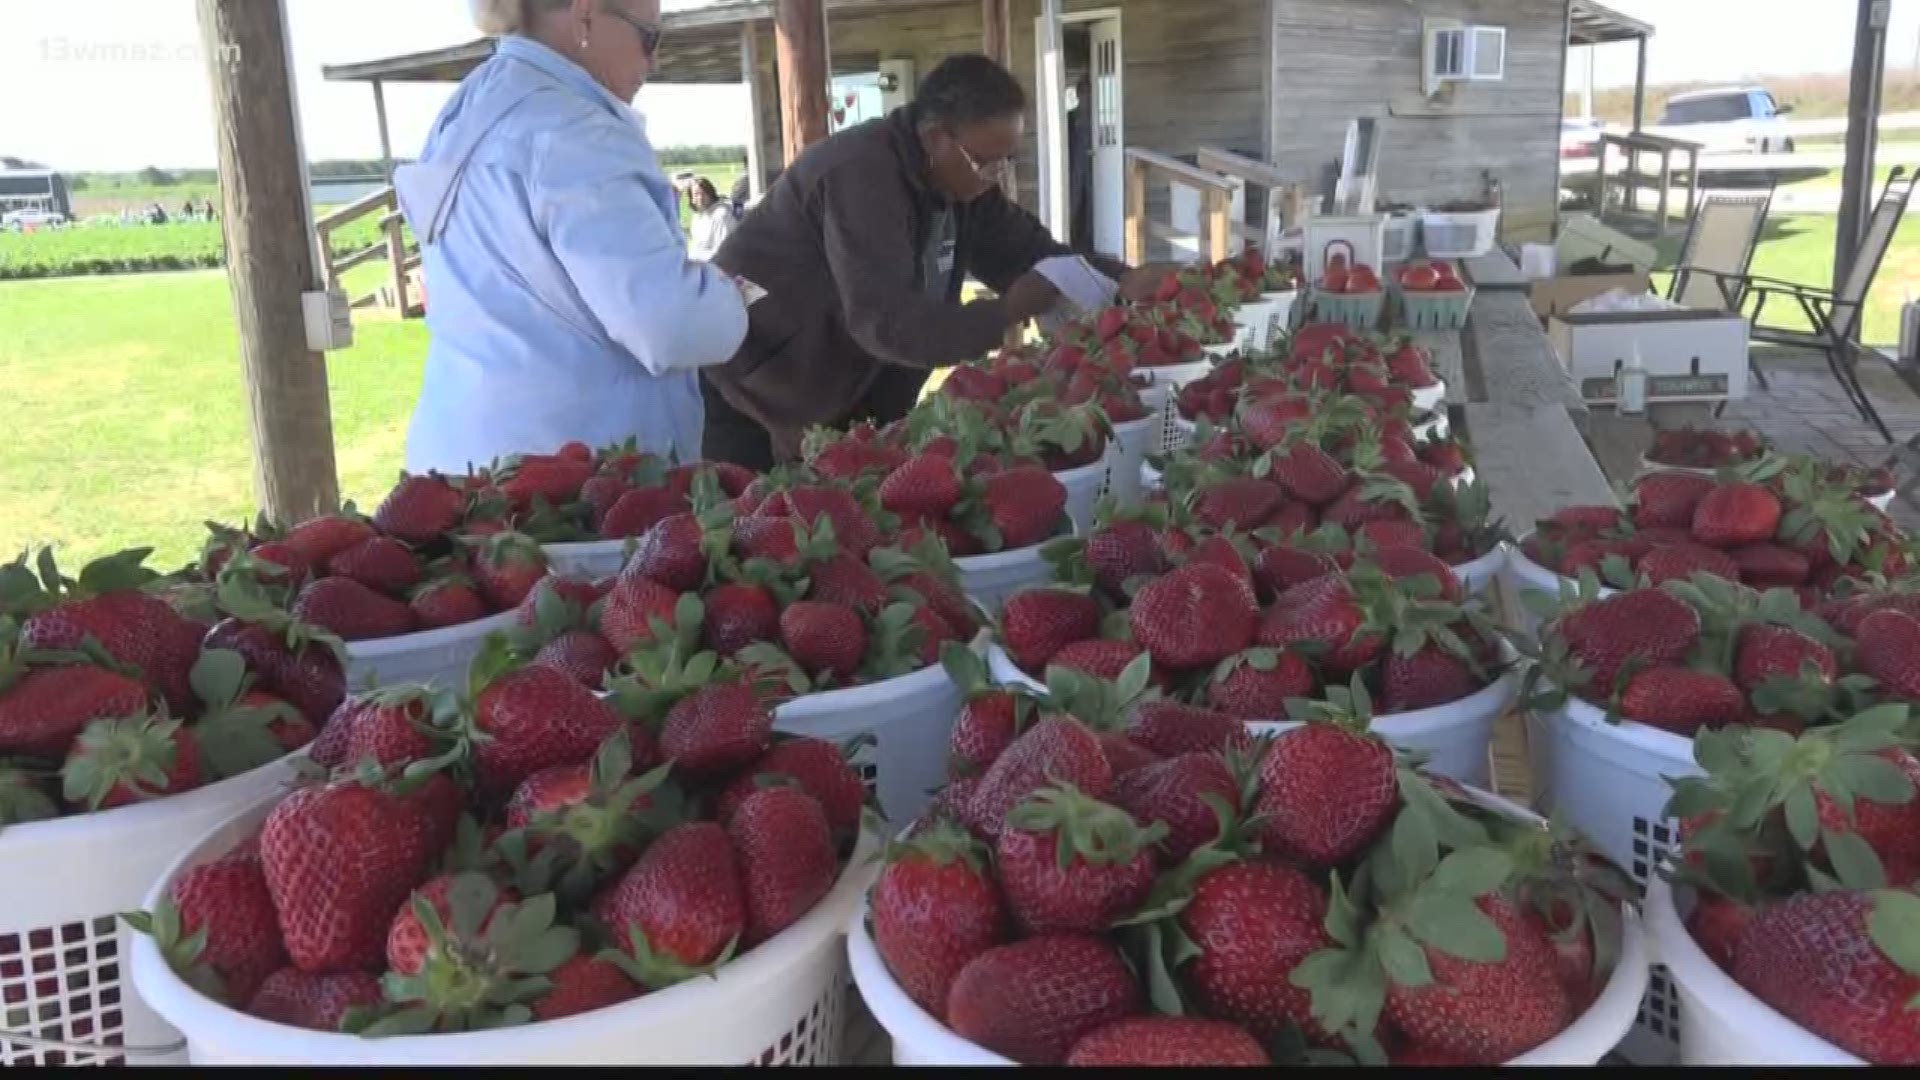 Spring in Central Georgia means fresh strawberries, and the annual Georgia Strawberry Festival will have that and more.